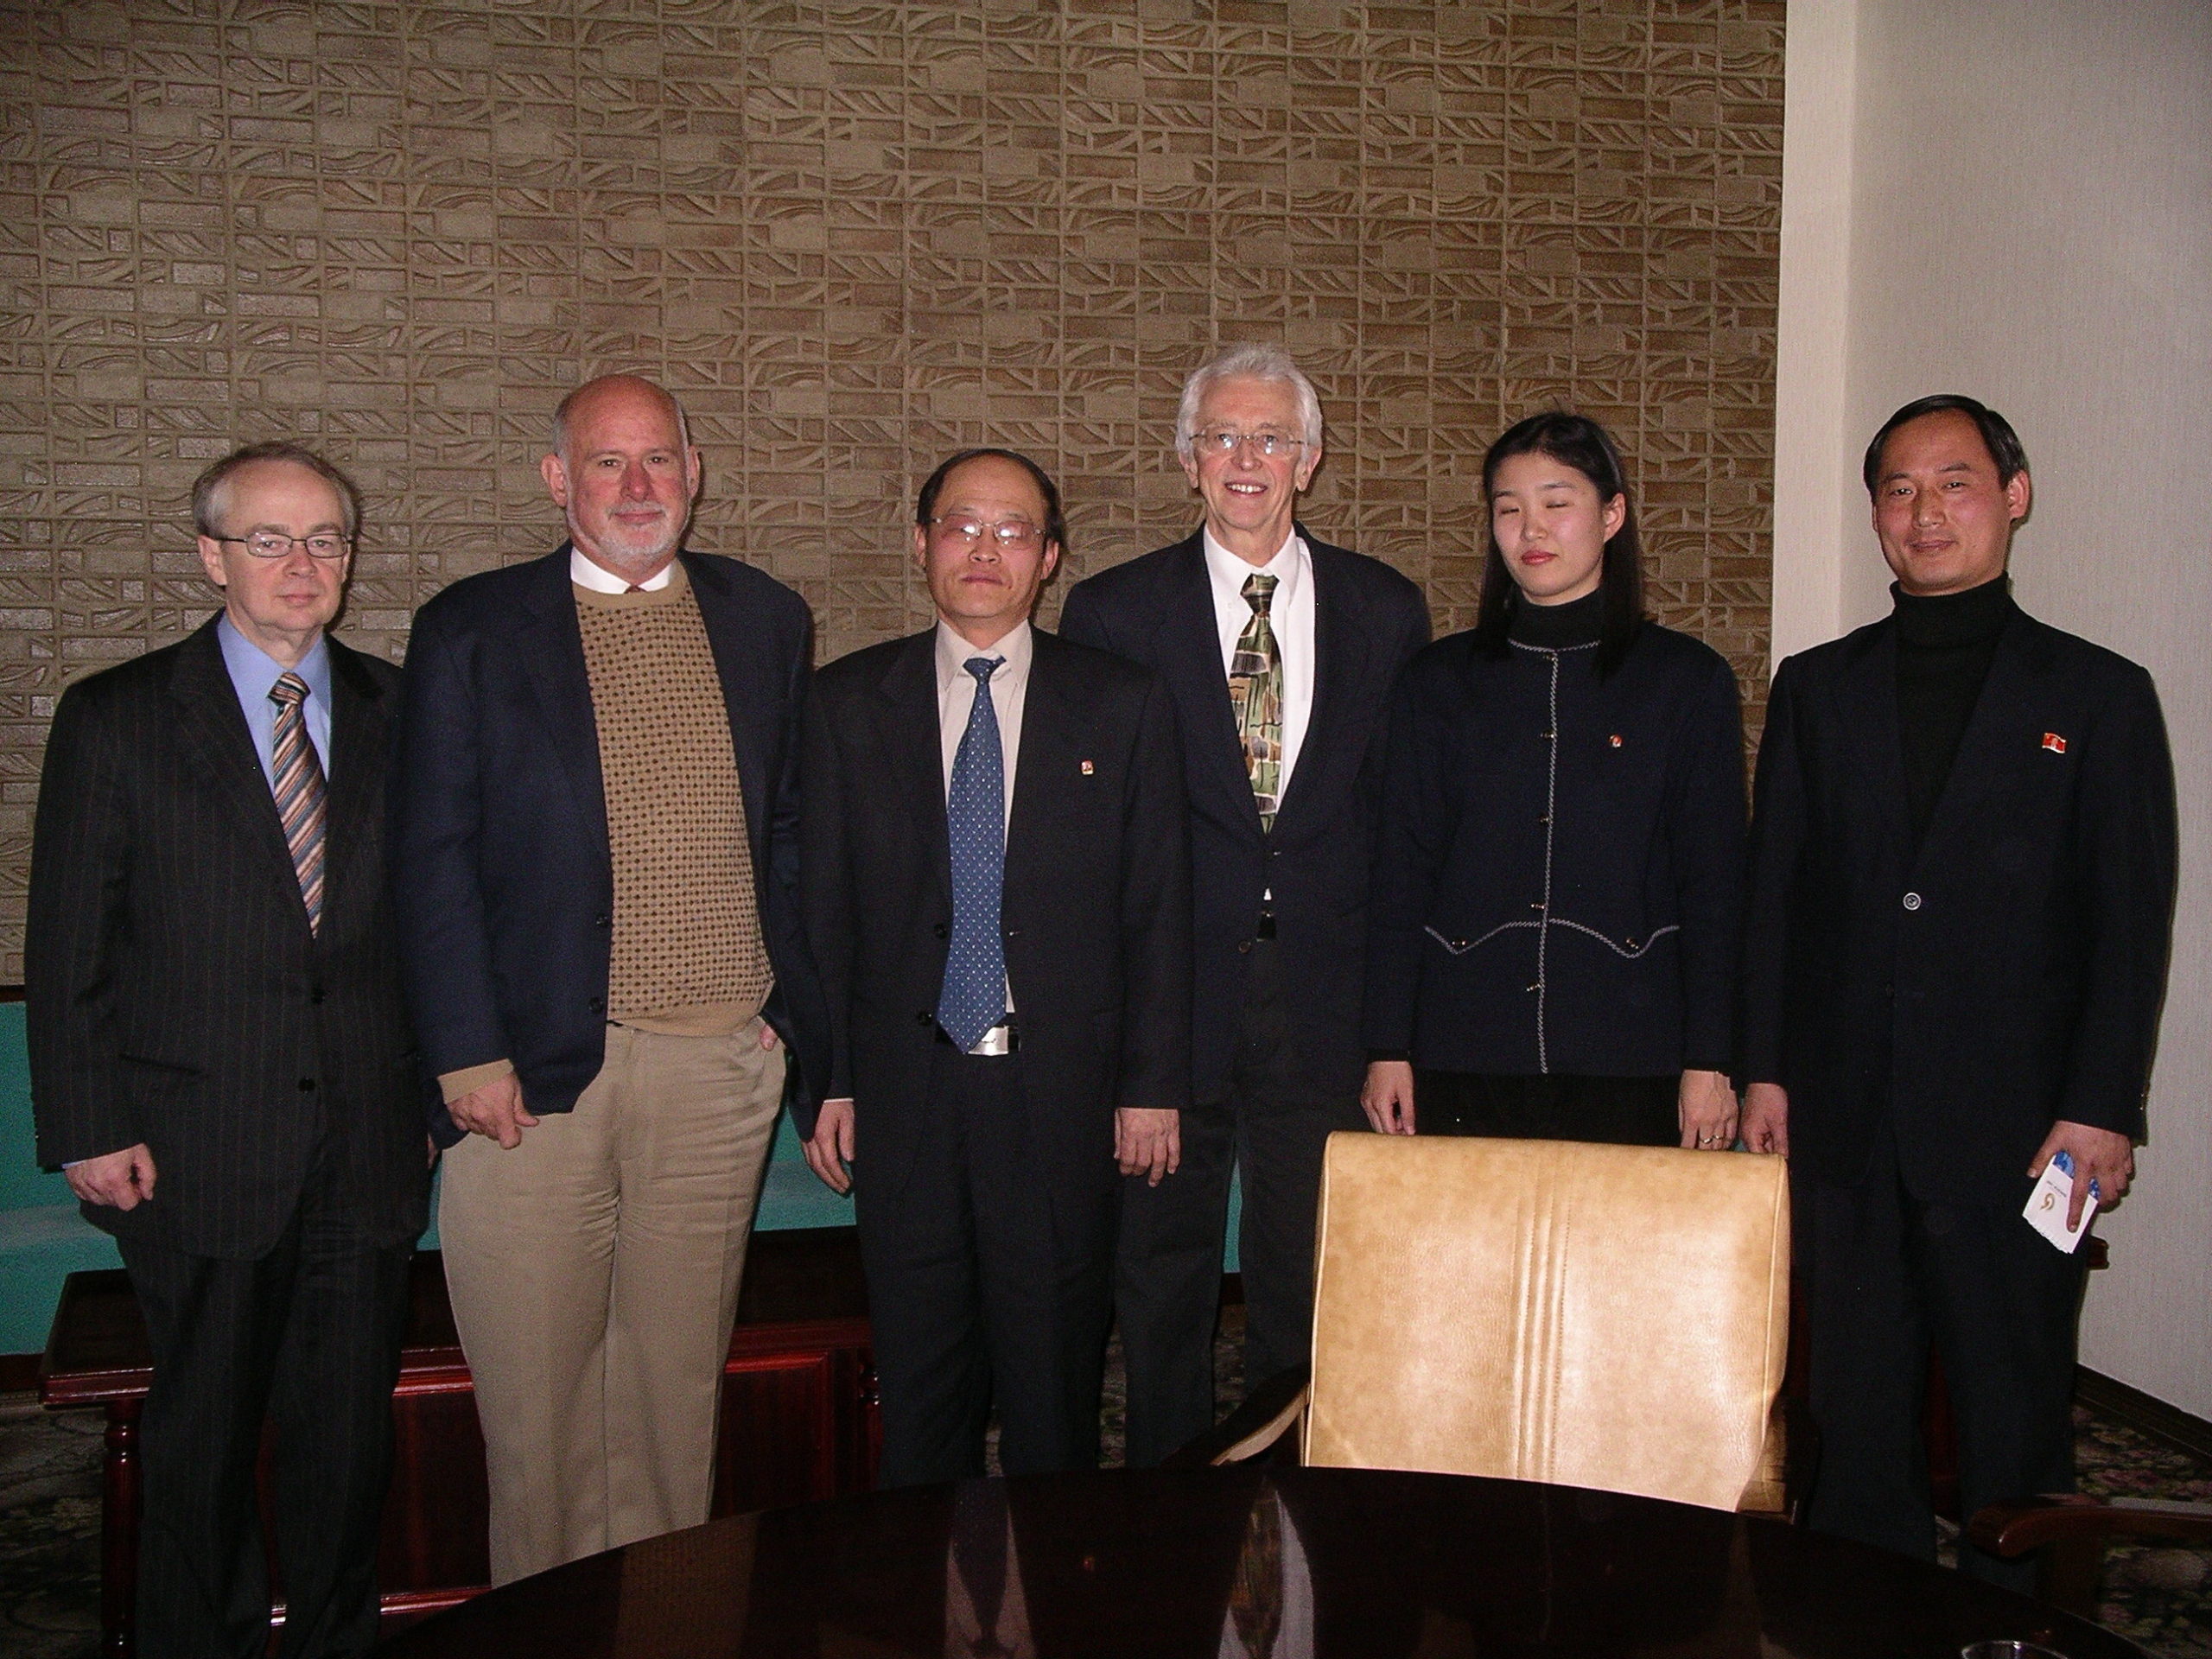 Three Americans and three Korean officials posing for a friendly photo